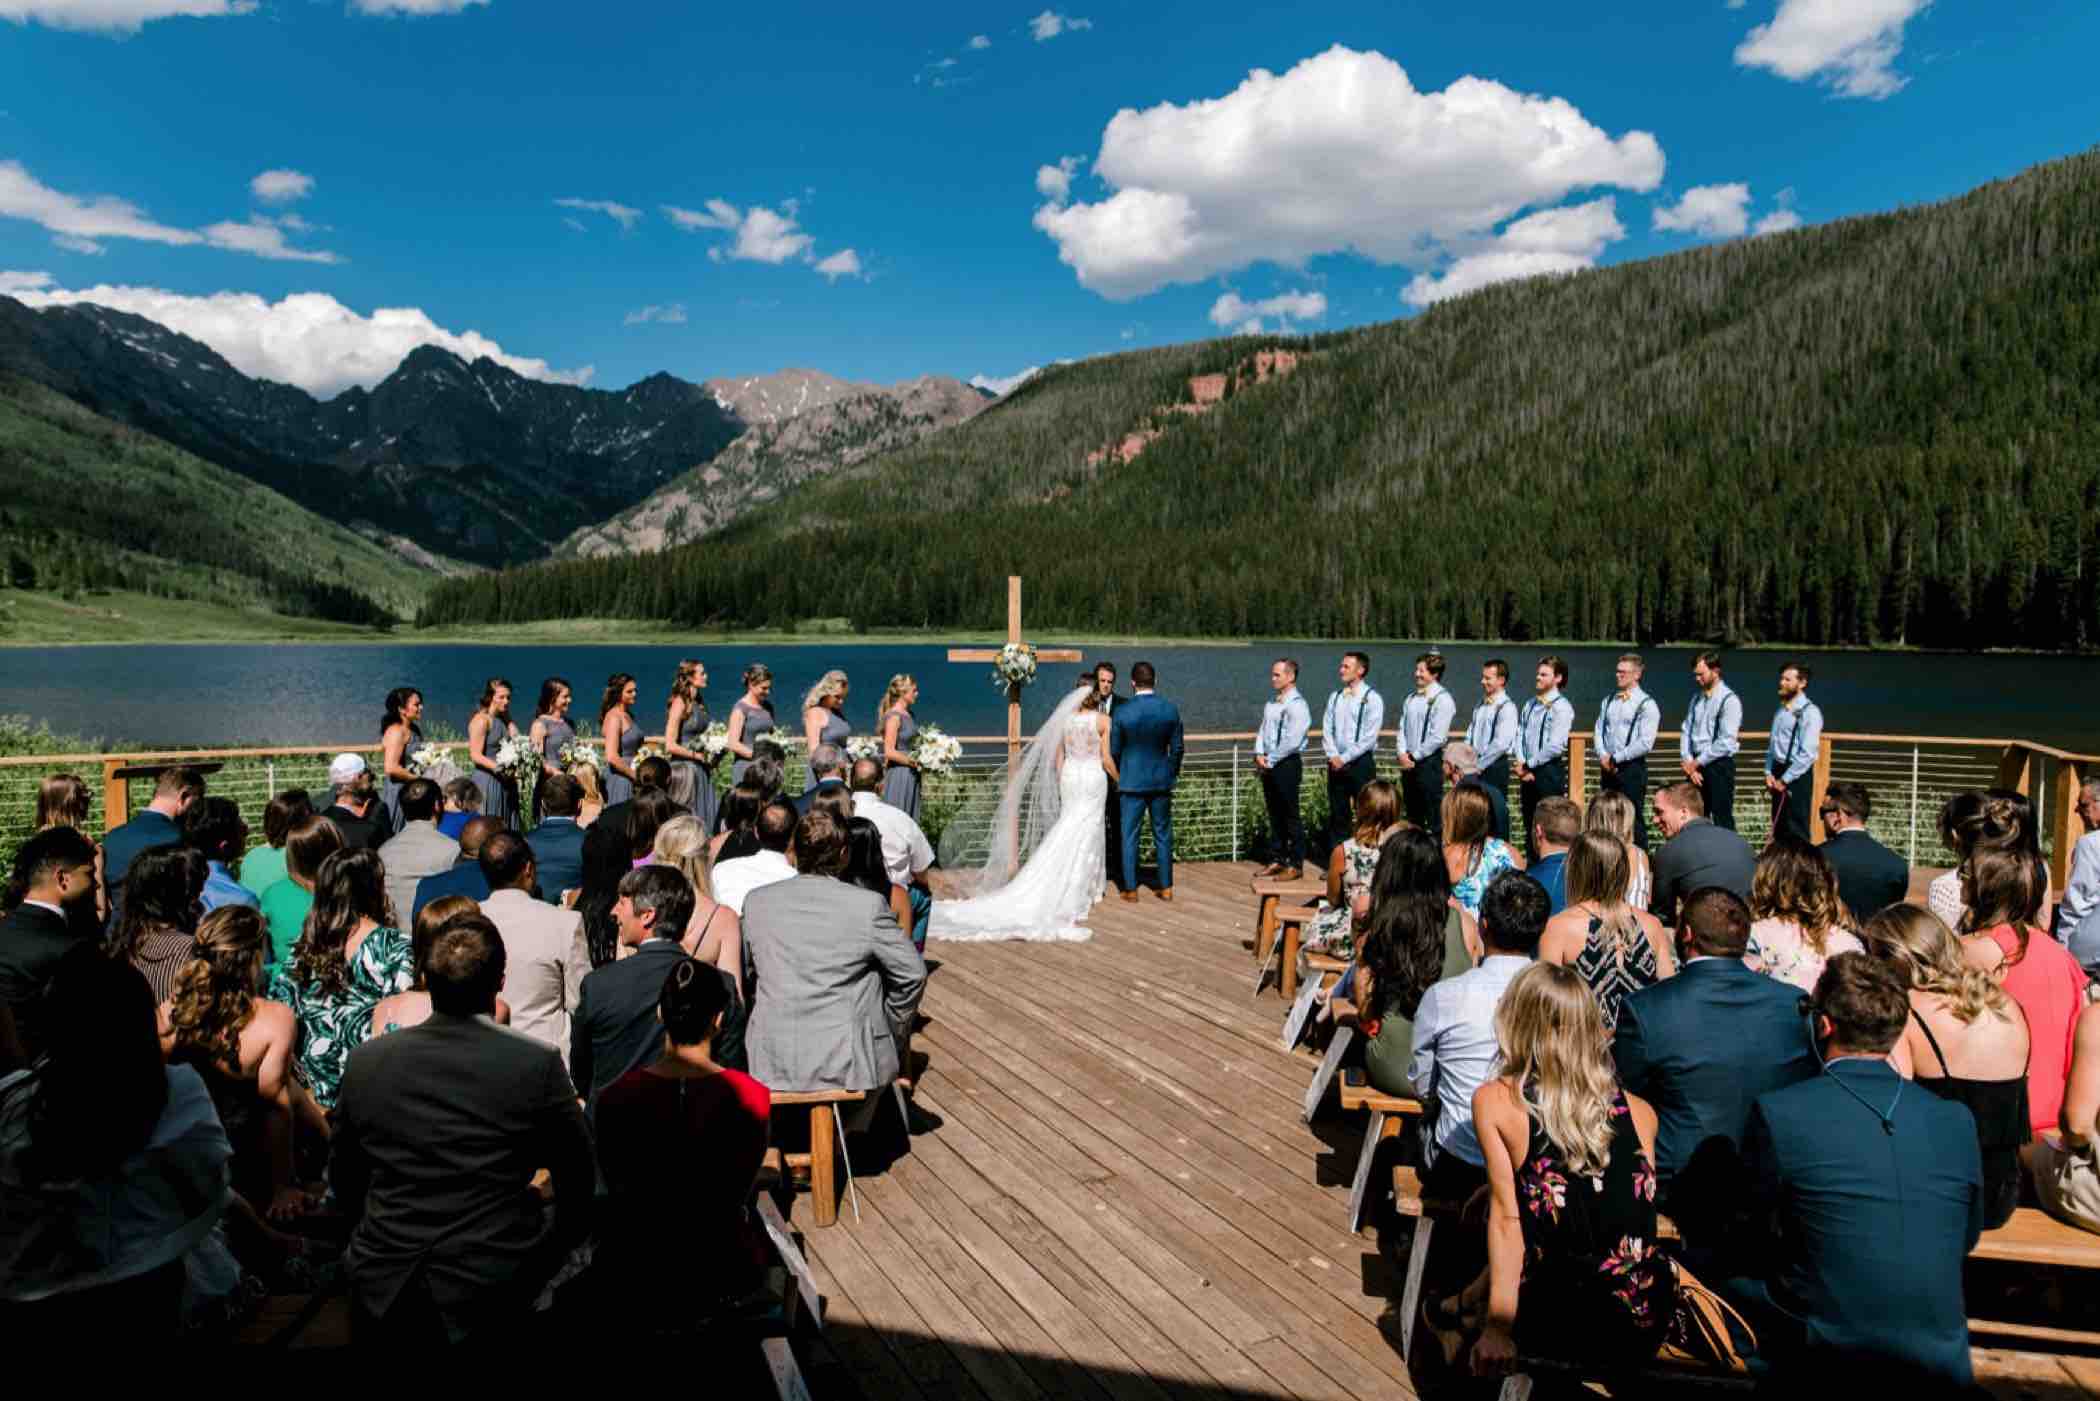 The Gore Range of the Colorado Rocky Mountains are visible from the ceremony site at Piney River Ranch, a wedding venue in Vail. Photo by Ali and Garrett, Romantic, Adventurous, Nostalgic Wedding Photographers.